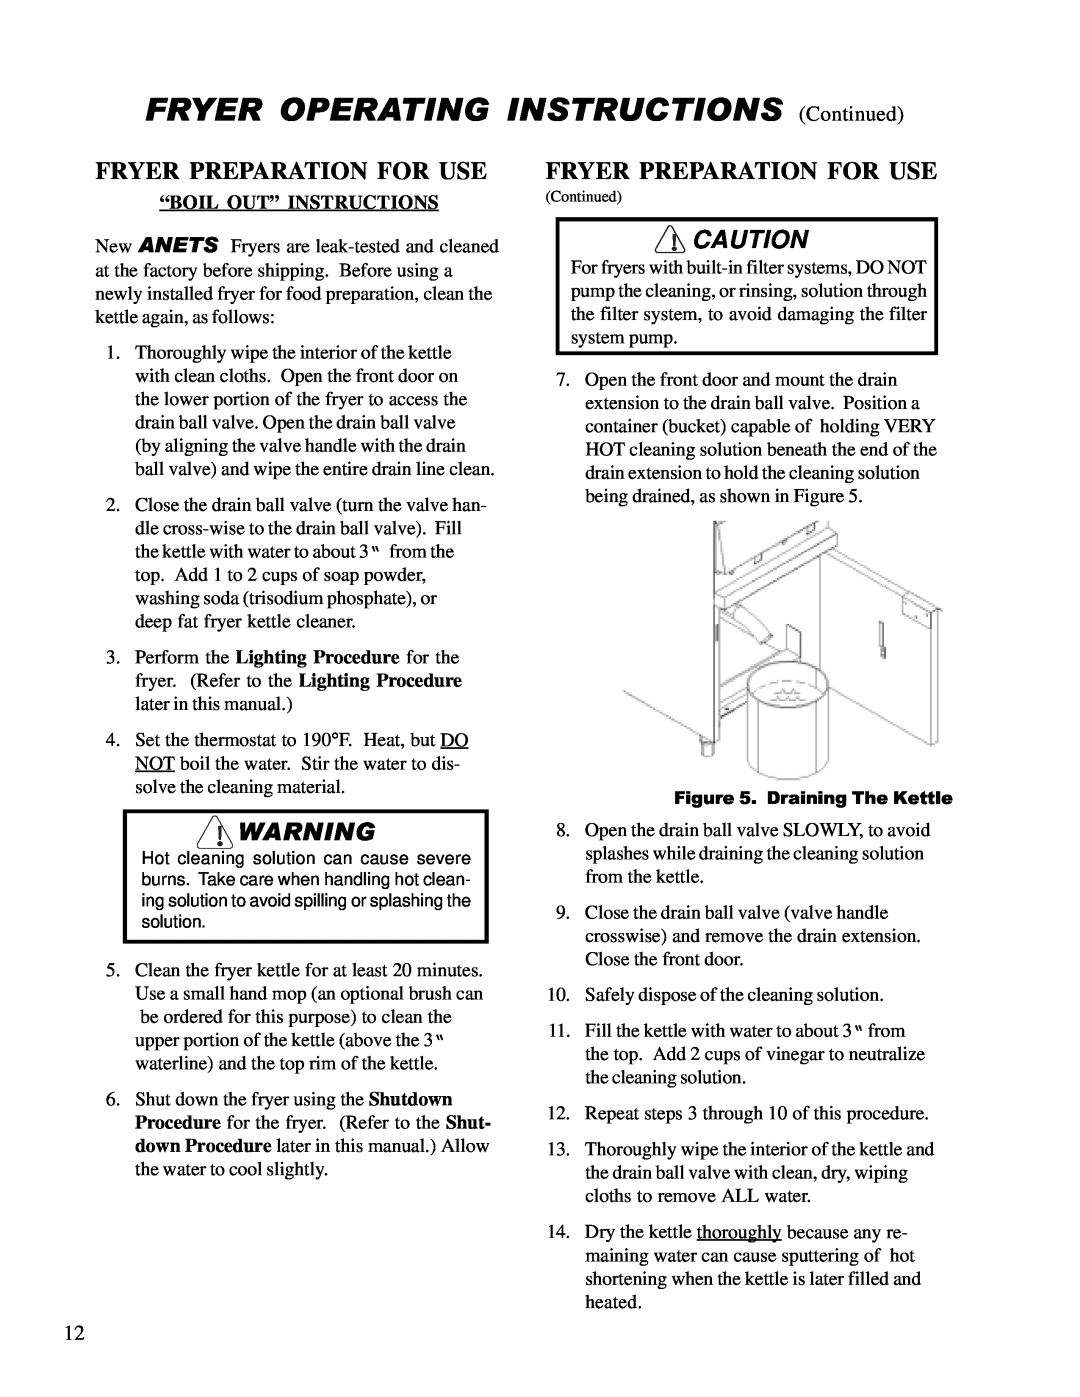 Anetsberger Brothers 14GS 14GU FRYER OPERATING INSTRUCTIONS Continued, Fryer Preparation For Use, “Boil Out” Instructions 